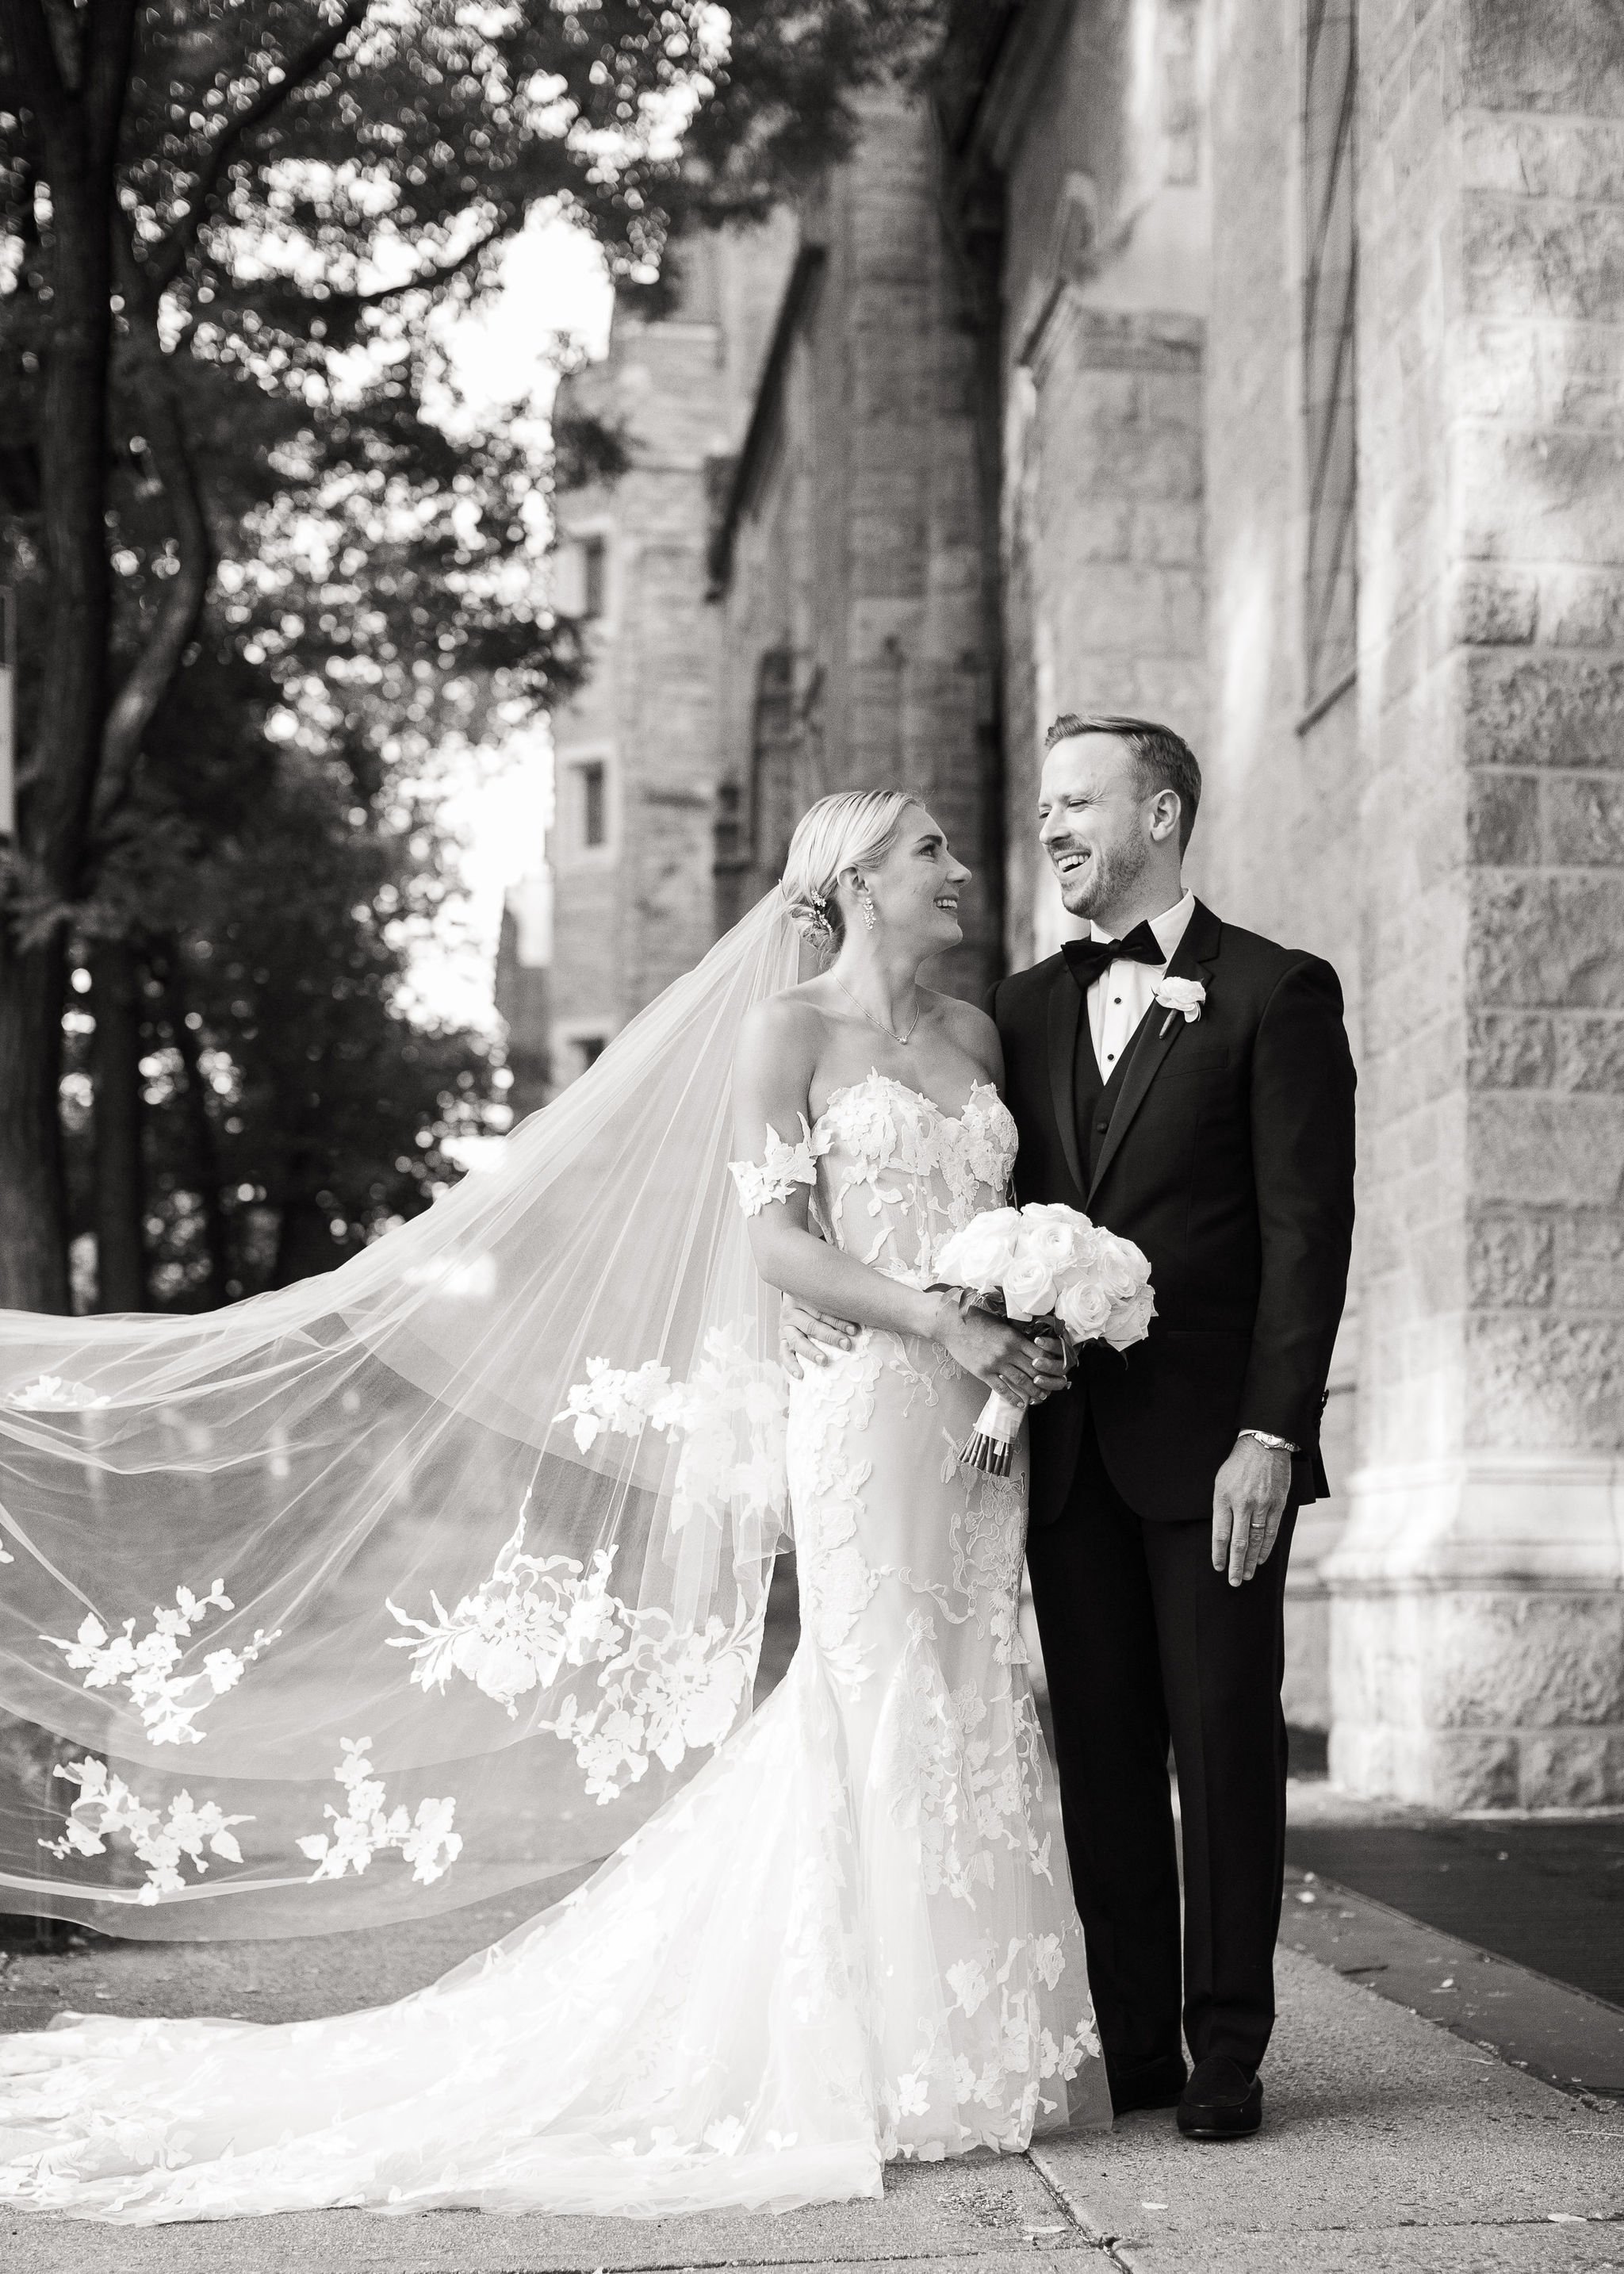  Monique L’huillier willow NYC wedding dramatic veil 